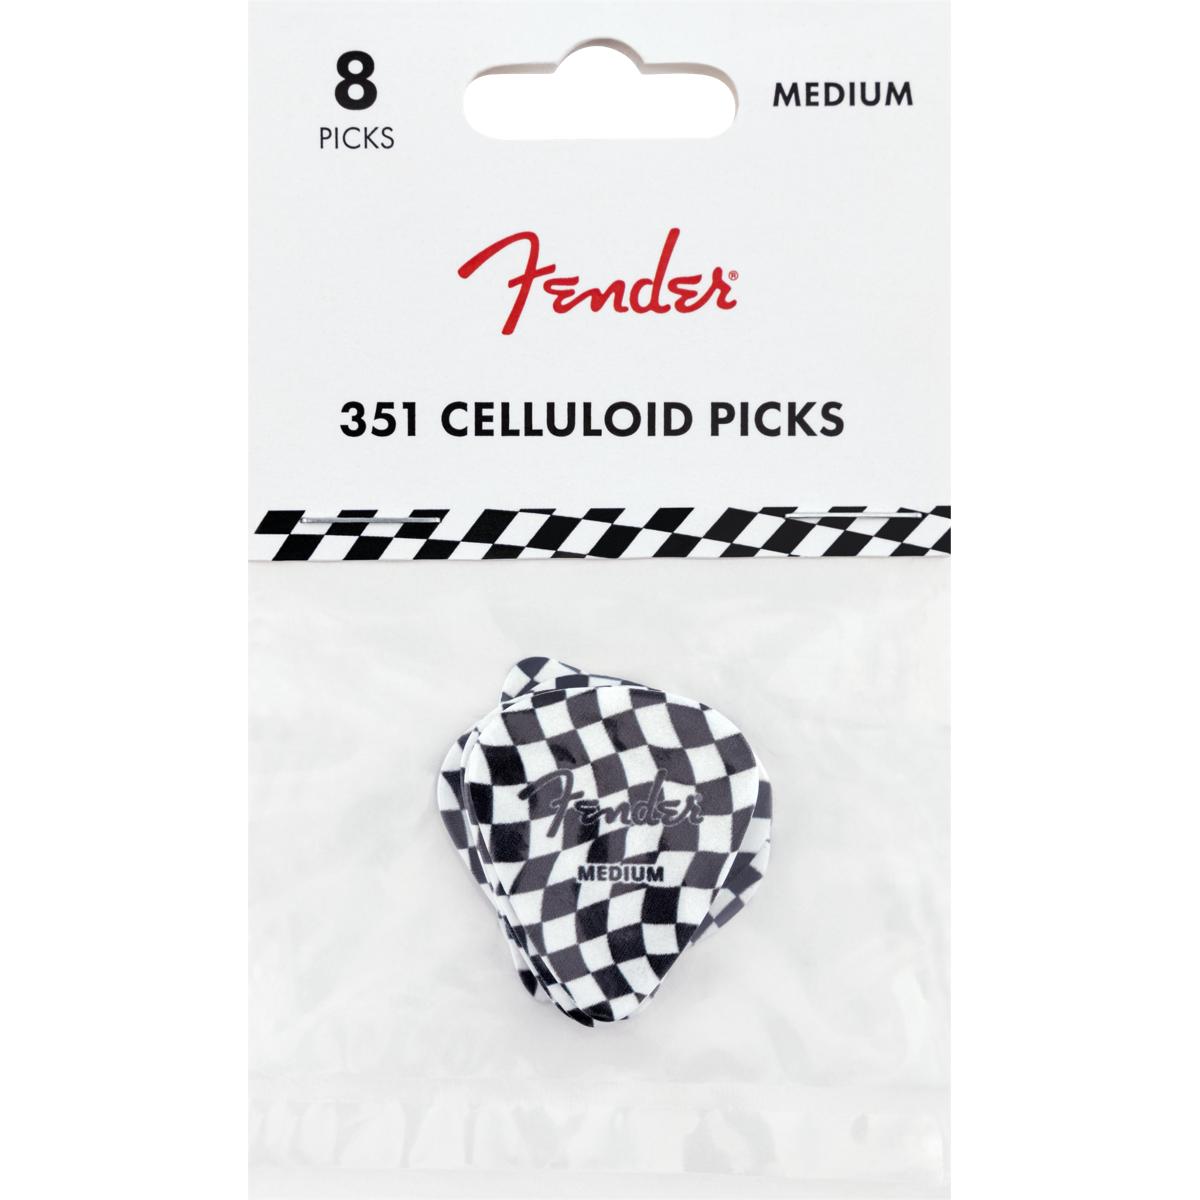 Contains 8 medium gauge printed picks Wavy checkerboard design Traditional 351 pick shape Crafted from celluloid